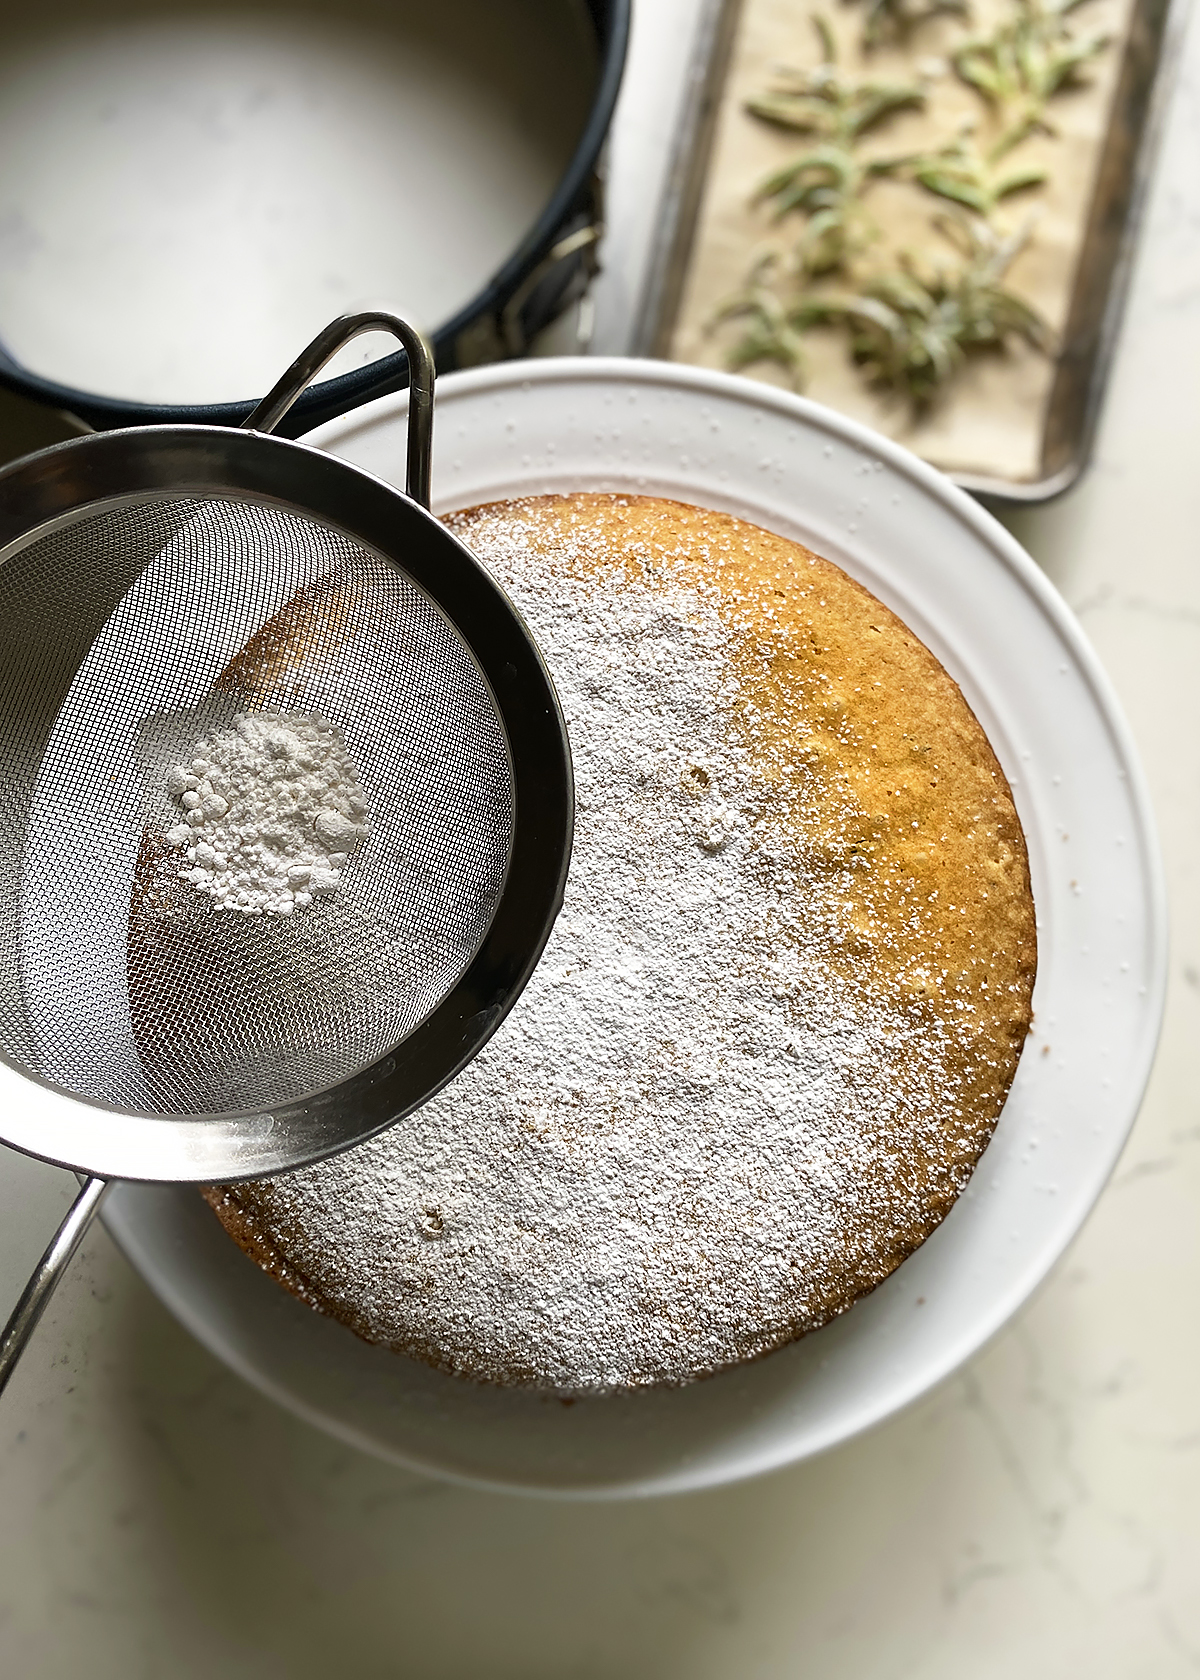 rosemary olive oil cake dusting with powdered sugar